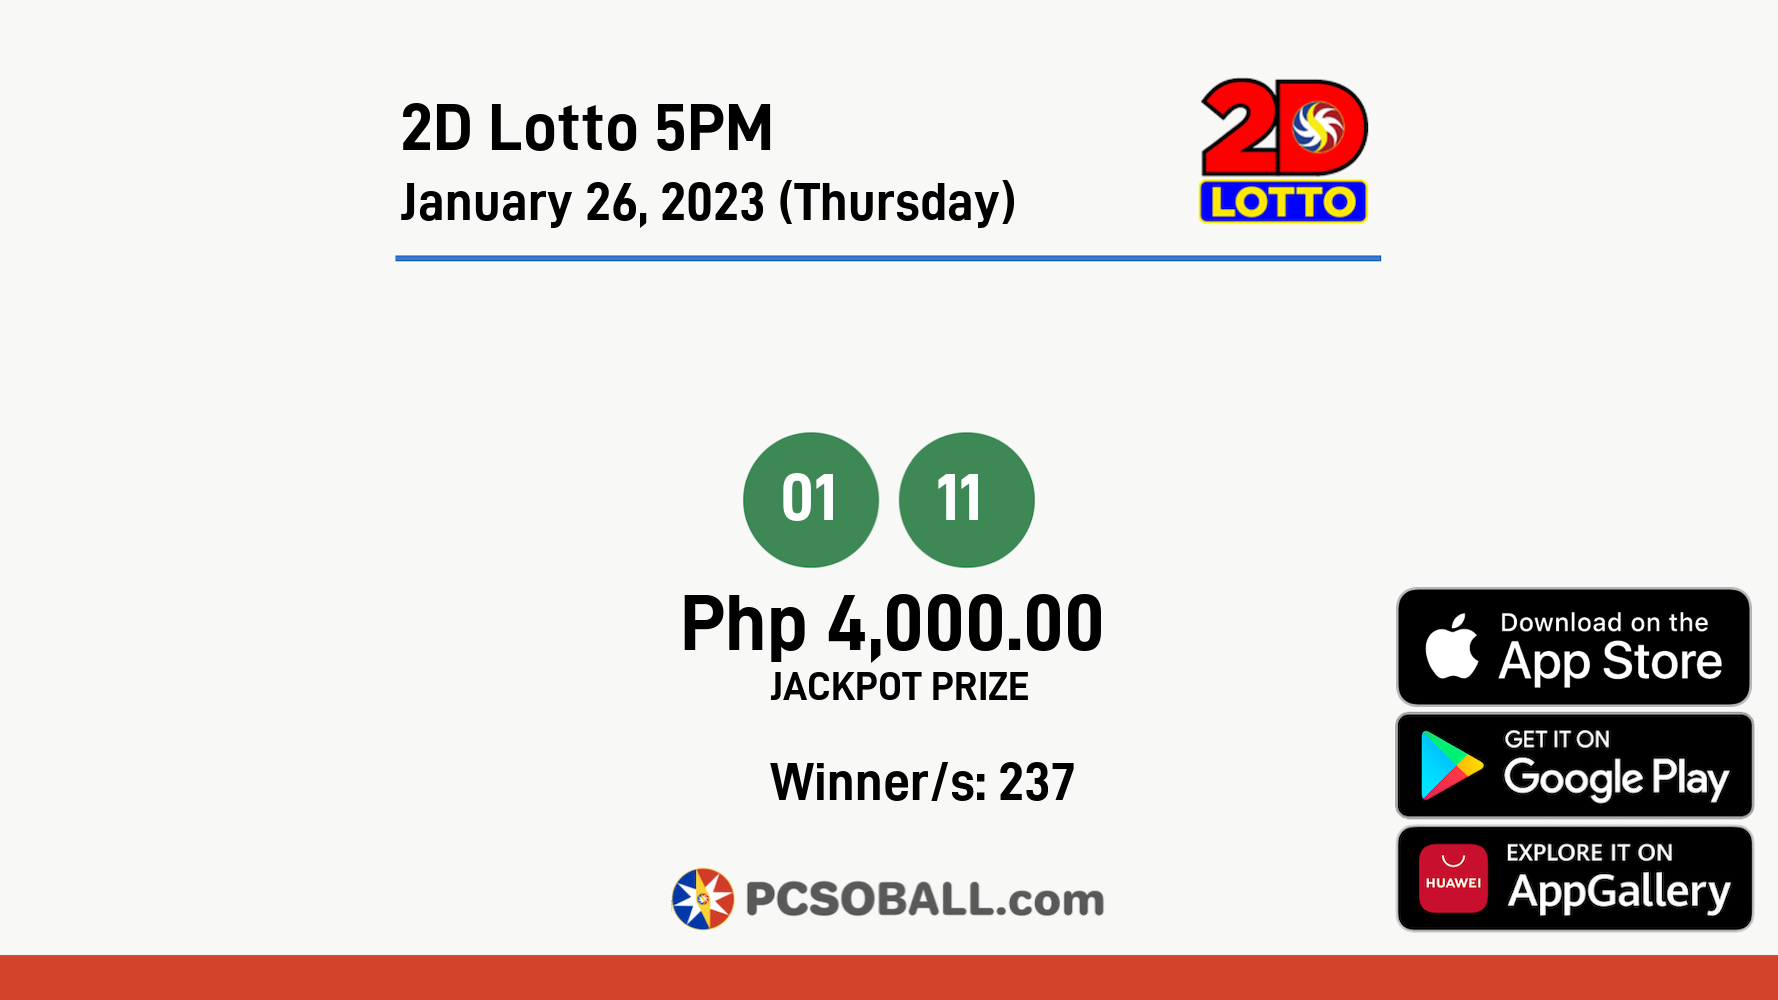 2D Lotto 5PM January 26, 2023 (Thursday) Result